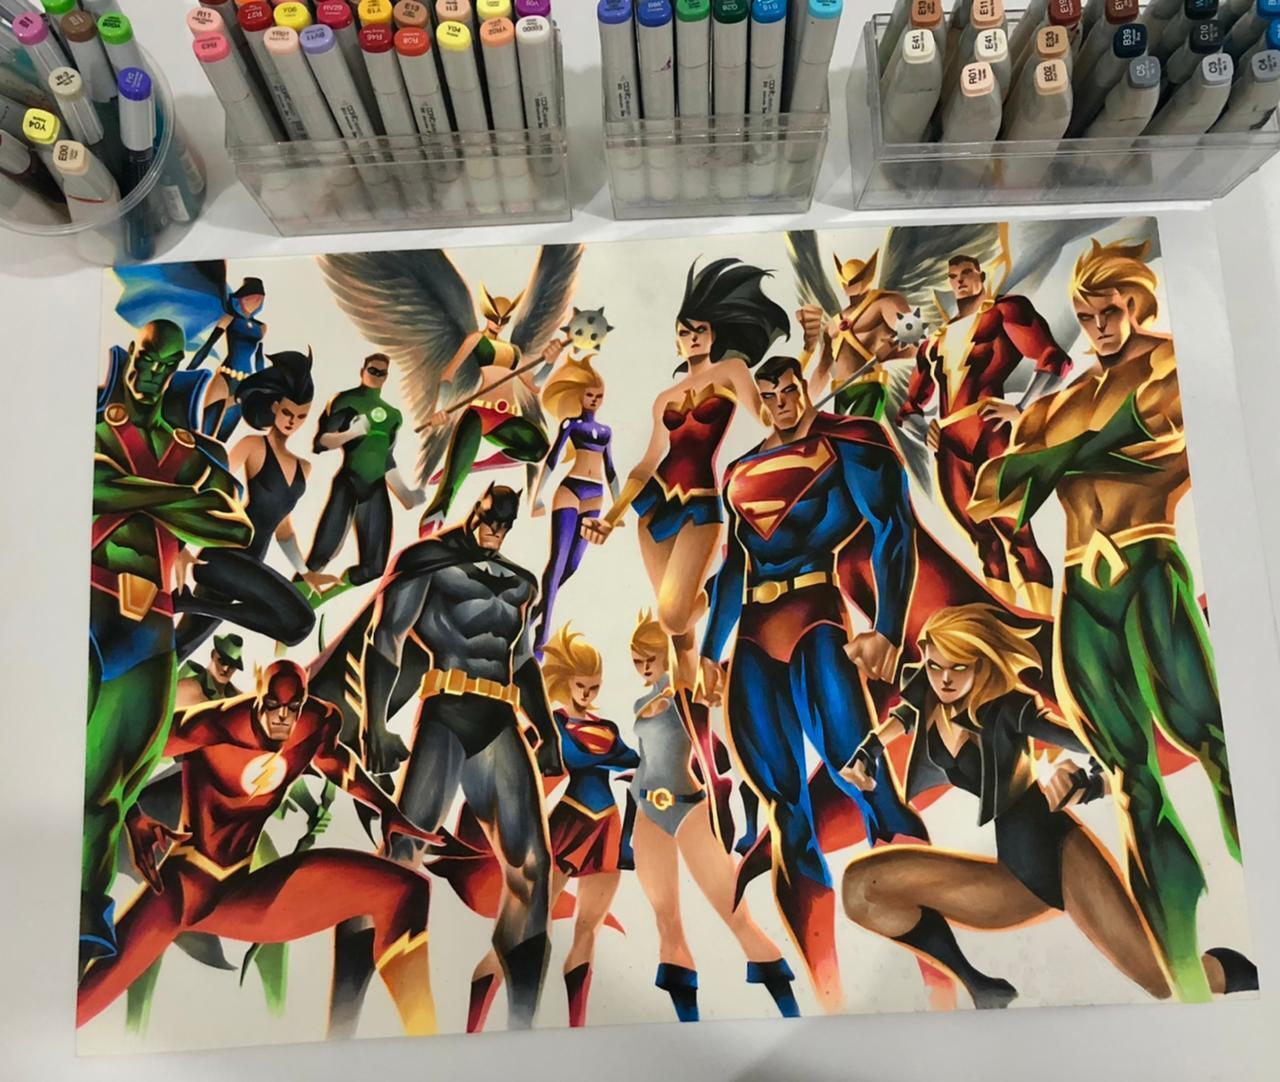 JUSTICE LEAGUE HUGE 17X24 ORIGINAL PINUP ART BY MARVEL DC ARTIST THONY SILAS